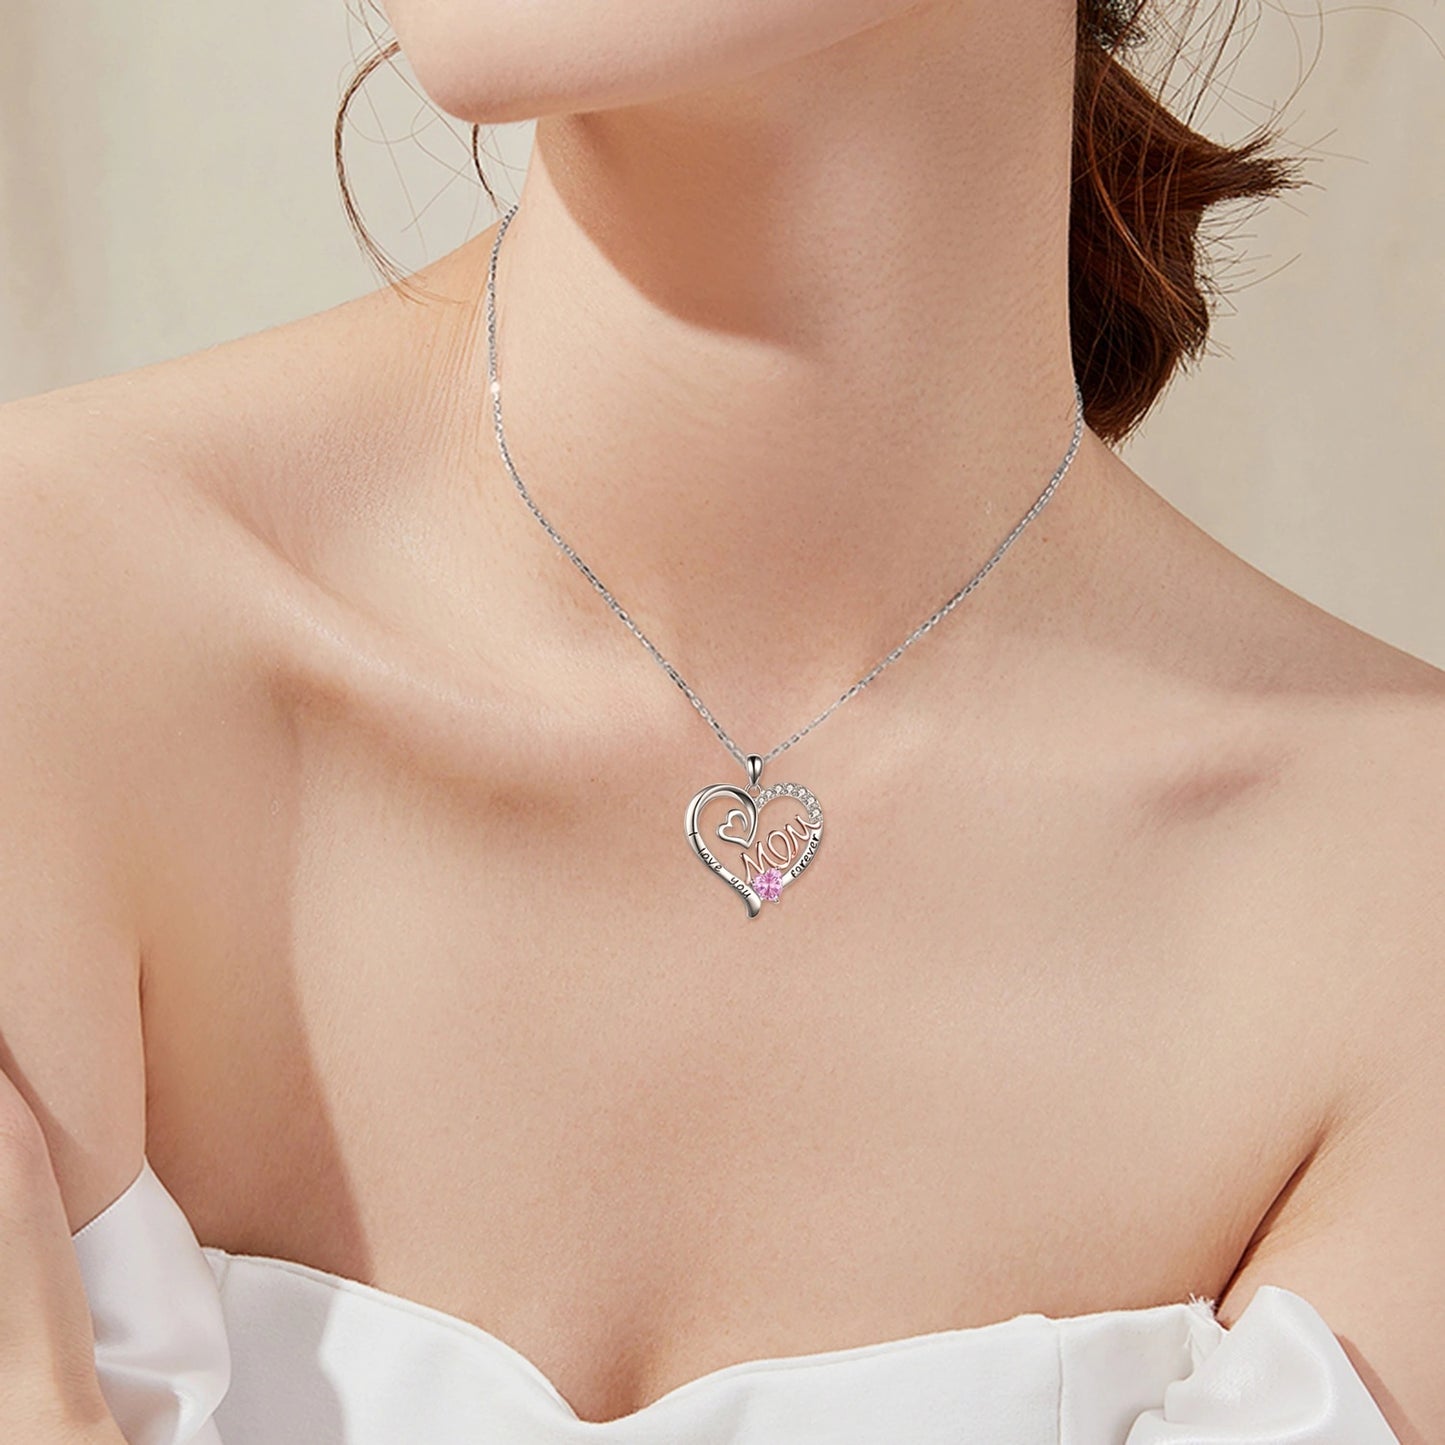 YFN Mom Necklace S925 Sterling Silver Heart CZ Pink Stone Love Mum Pendant Birthstone Jewelry for Women Mother Gifts (US only)